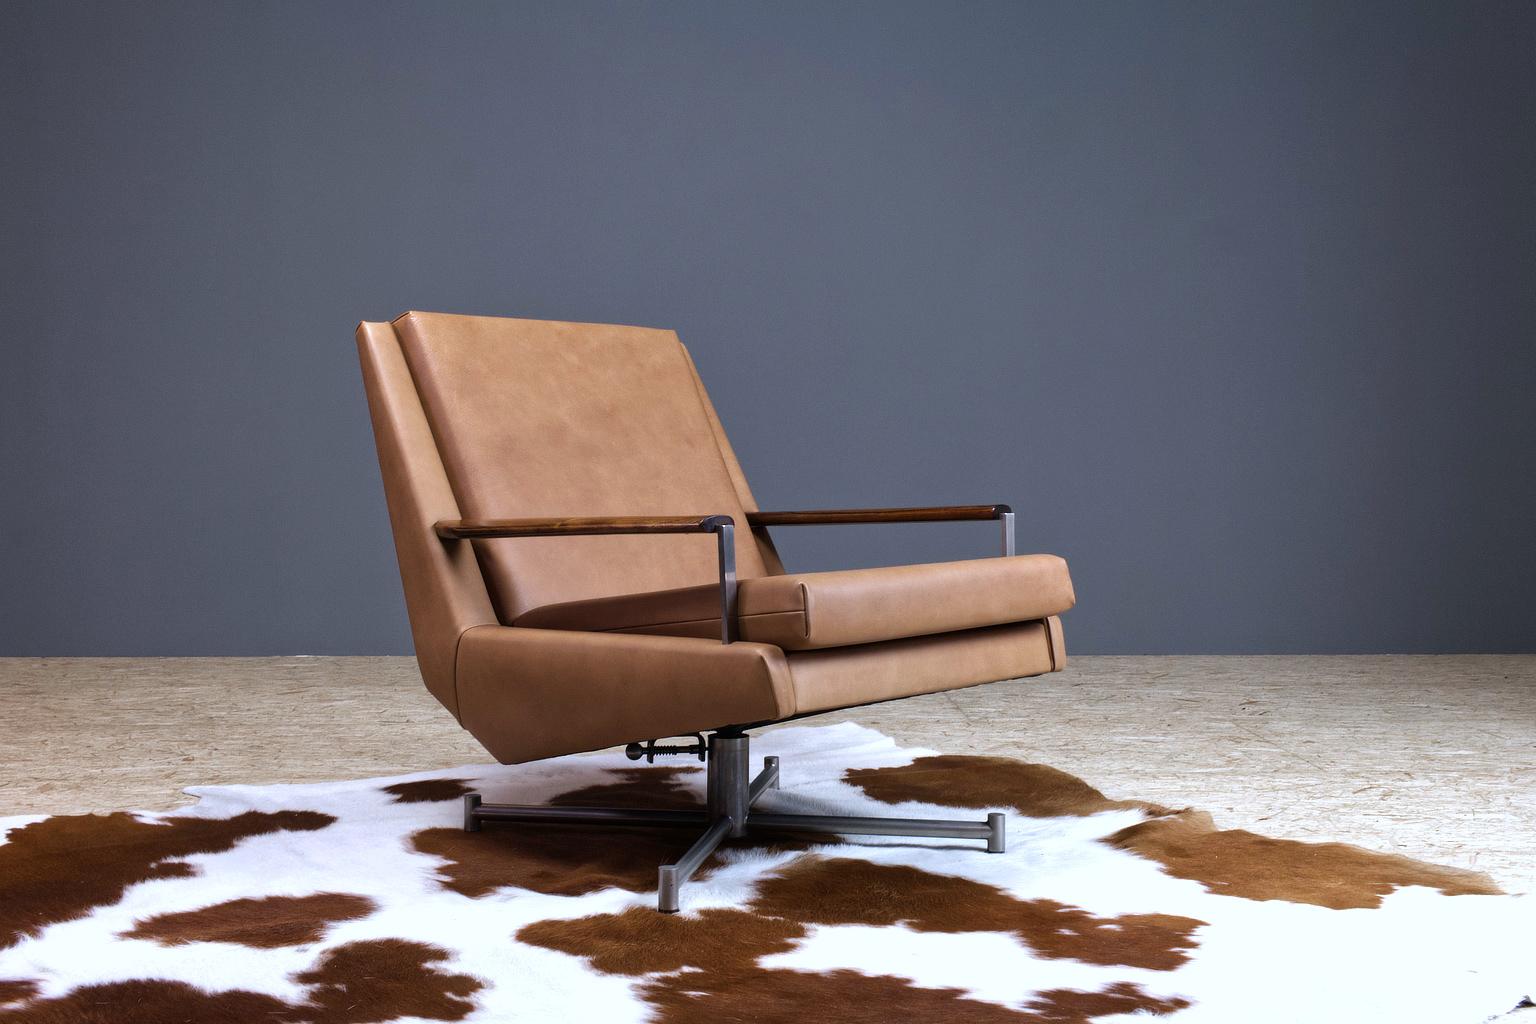 Modest yet luxurious swivel lounge chair in leather by Louis van Teeffelen for Dutch manufacturer WeBe, 1950s-1960s. Louis van Teeffelen introduced WeBe to a more Scandinavian inspired collection of which this chair with modest lines yet high